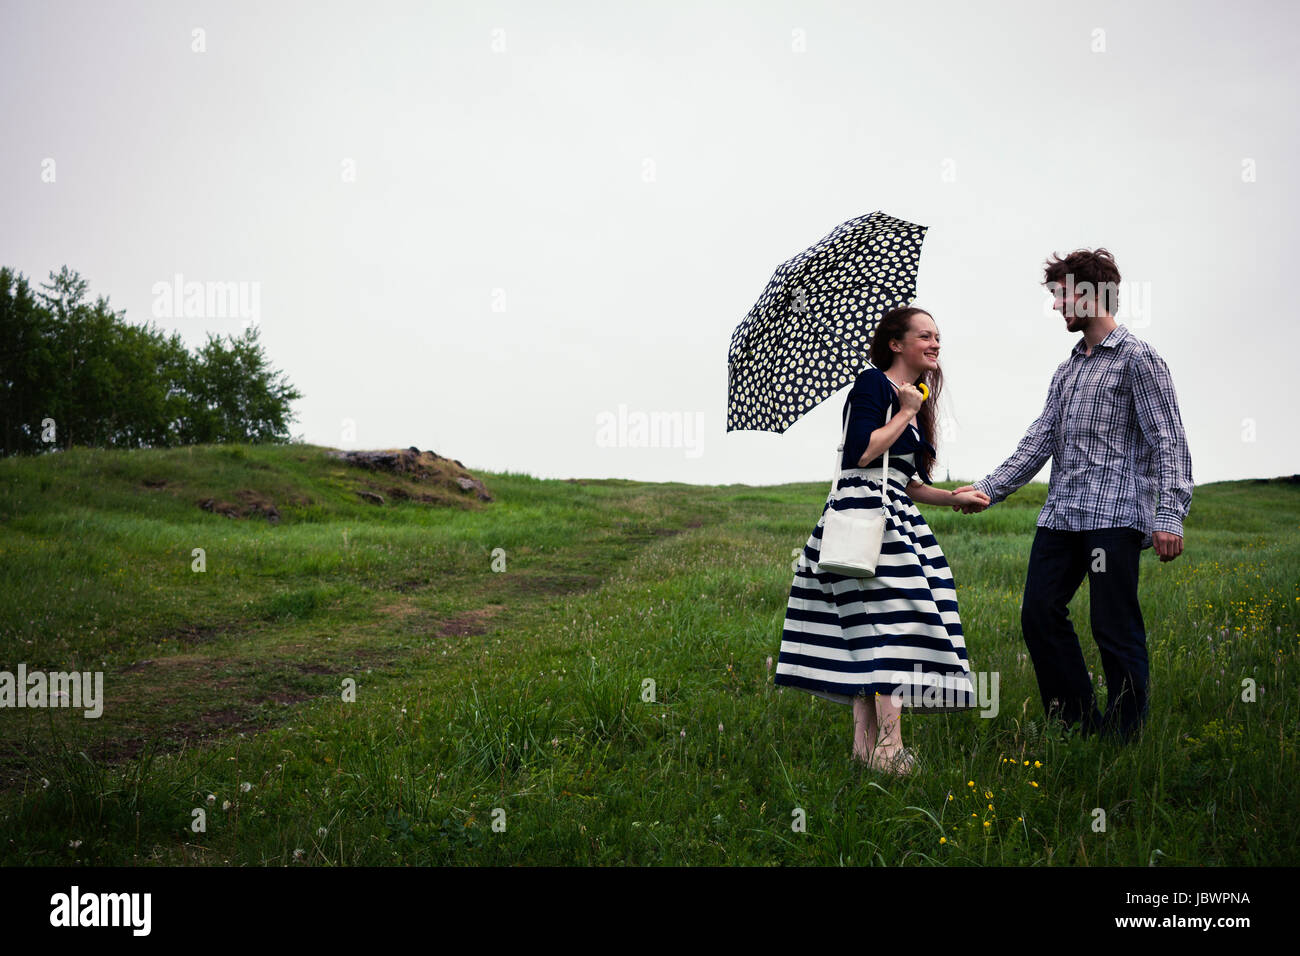 Couple standing in field, holding hands, young woman holding umbrella Stock Photo